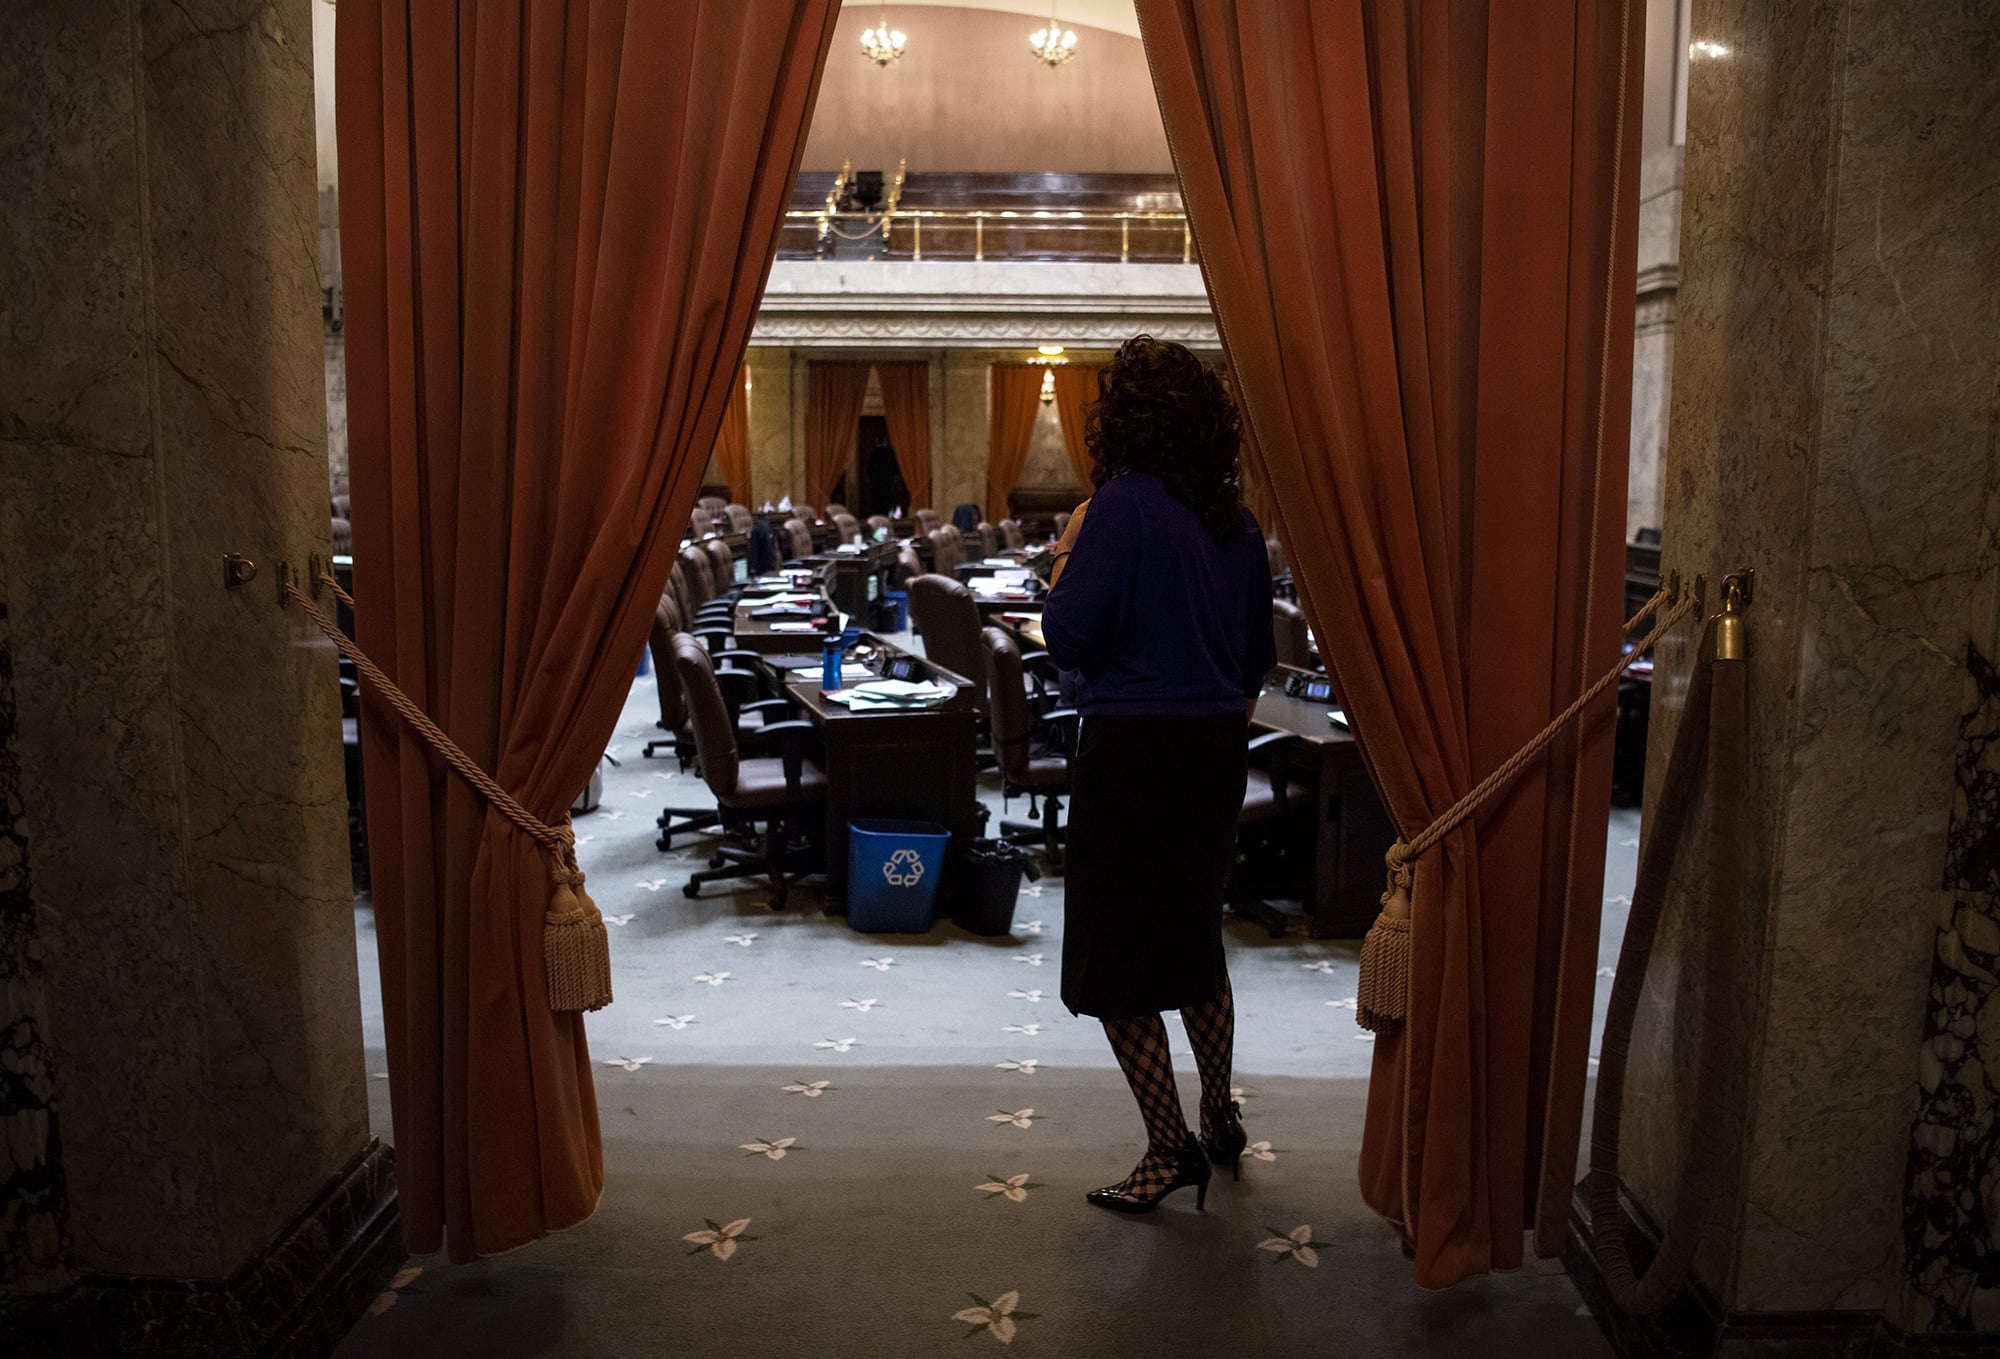 Gallery: Rep. Monica Stonier in Olympia